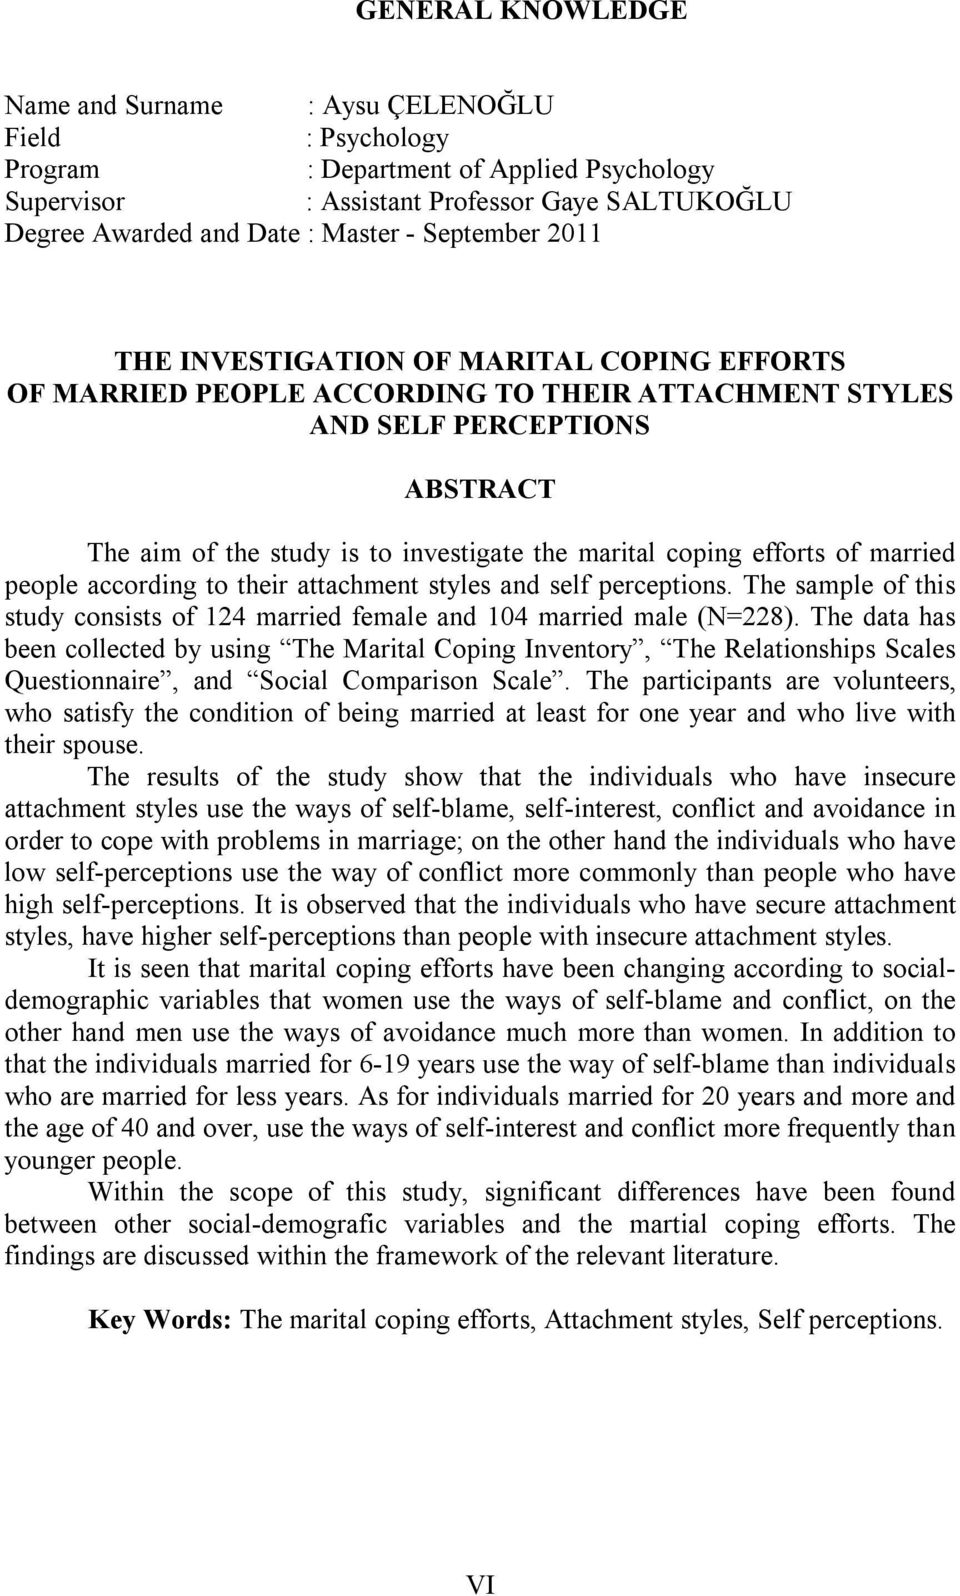 coping efforts of married people according to their attachment styles and self perceptions. The sample of this study consists of 124 married female and 104 married male (N=228).